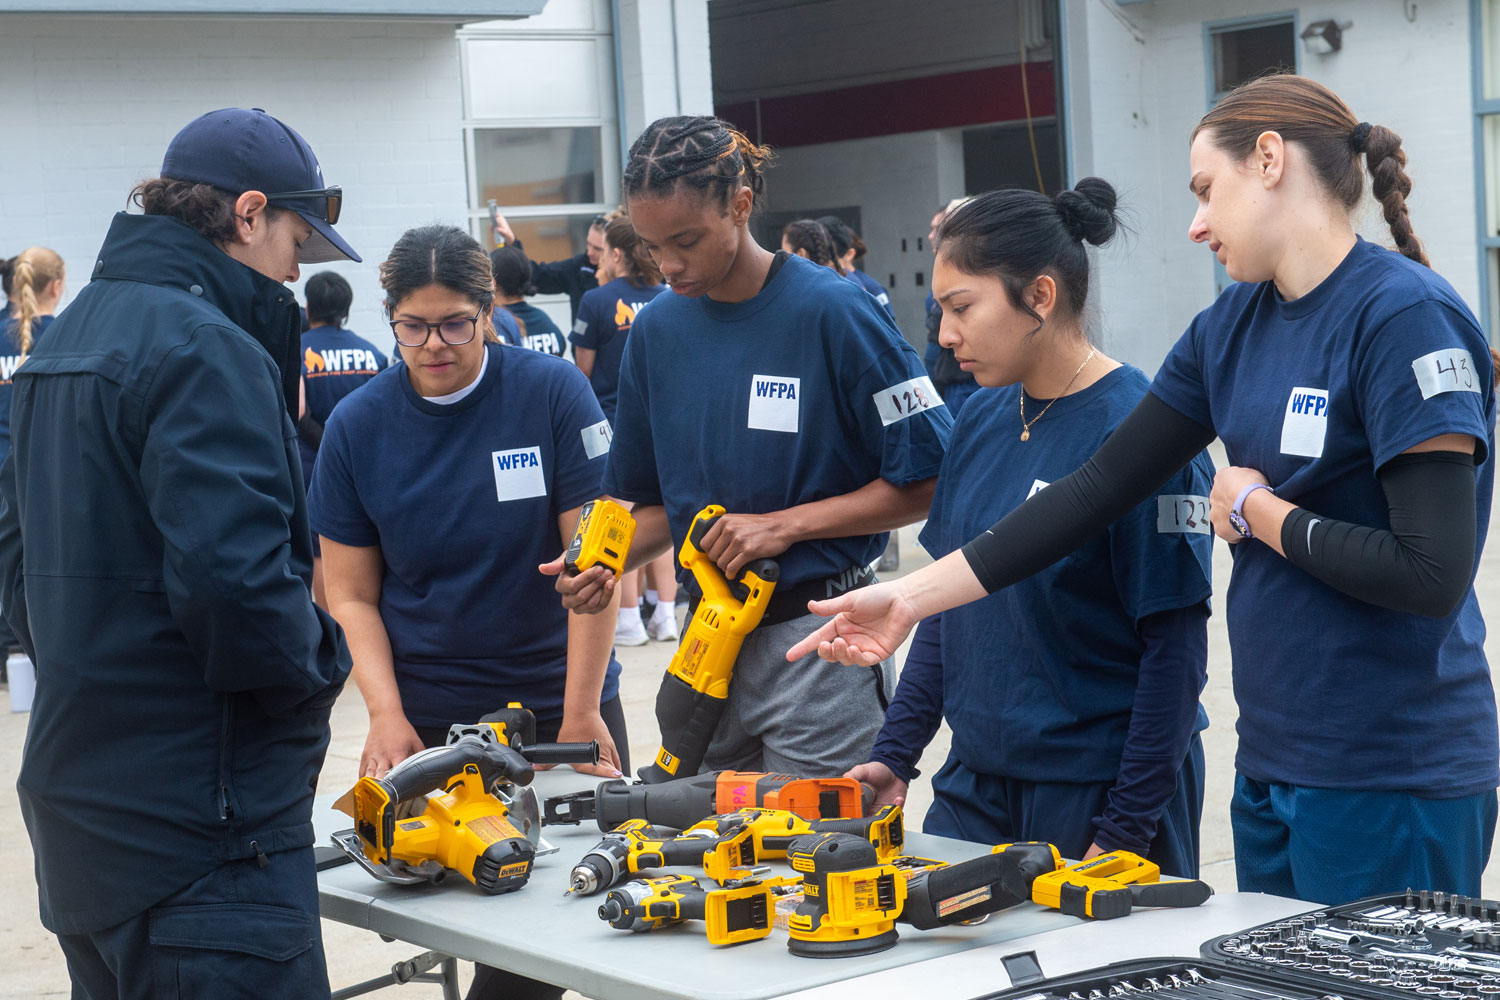 After being postponed for a weekend, the Los Angeles County Fire Department officially held its 2023 Women’s Prep Academy (WFPA) opening day on Saturday, March 4, at Department headquarters.